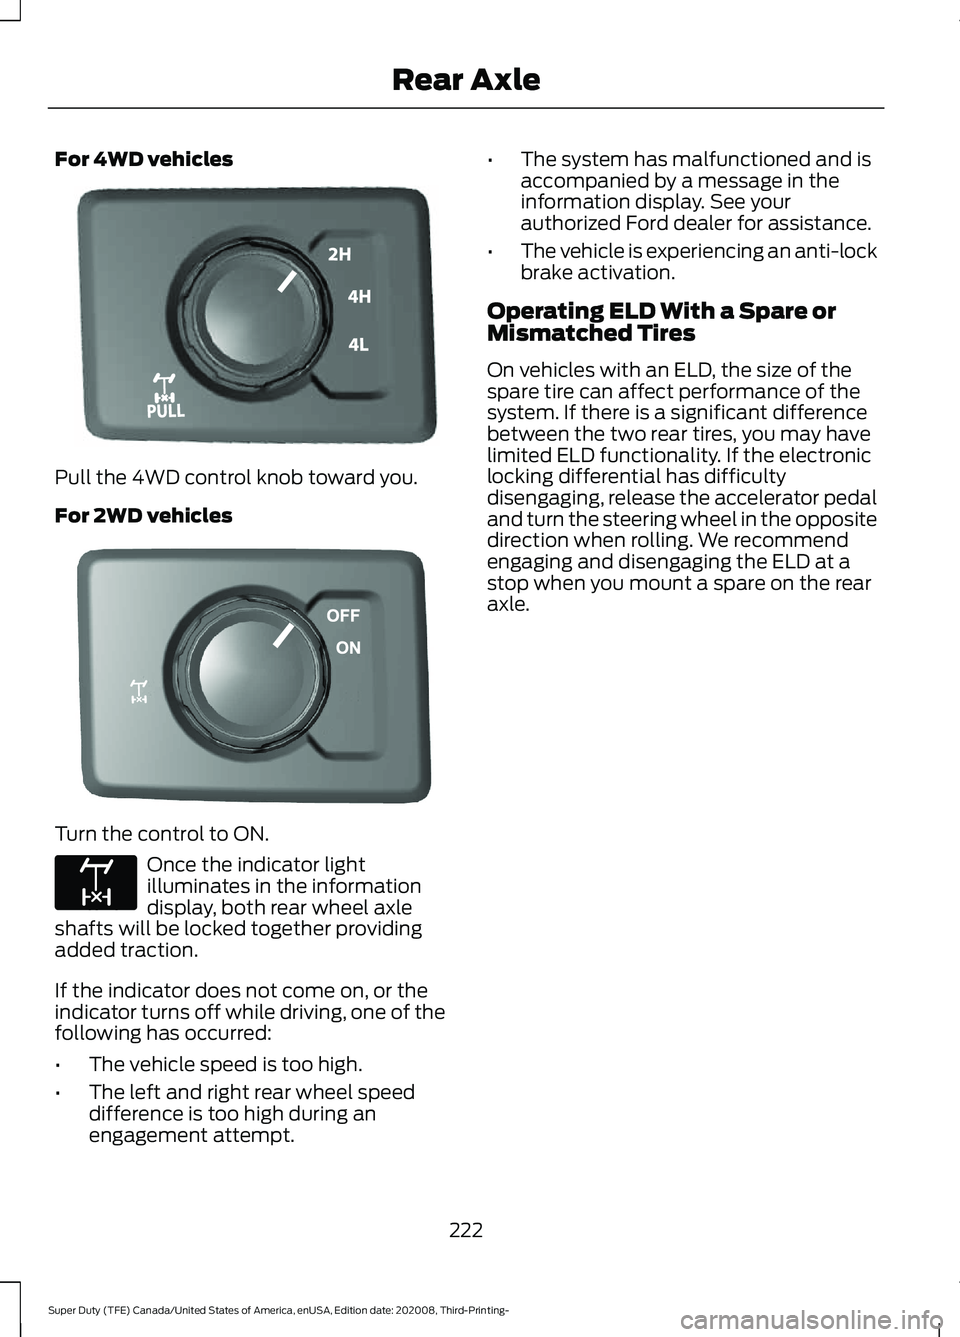 FORD F-450 2021  Owners Manual For 4WD vehicles
Pull the 4WD control knob toward you.
For 2WD vehicles
Turn the control to ON.
Once the indicator light
illuminates in the information
display, both rear wheel axle
shafts will be loc